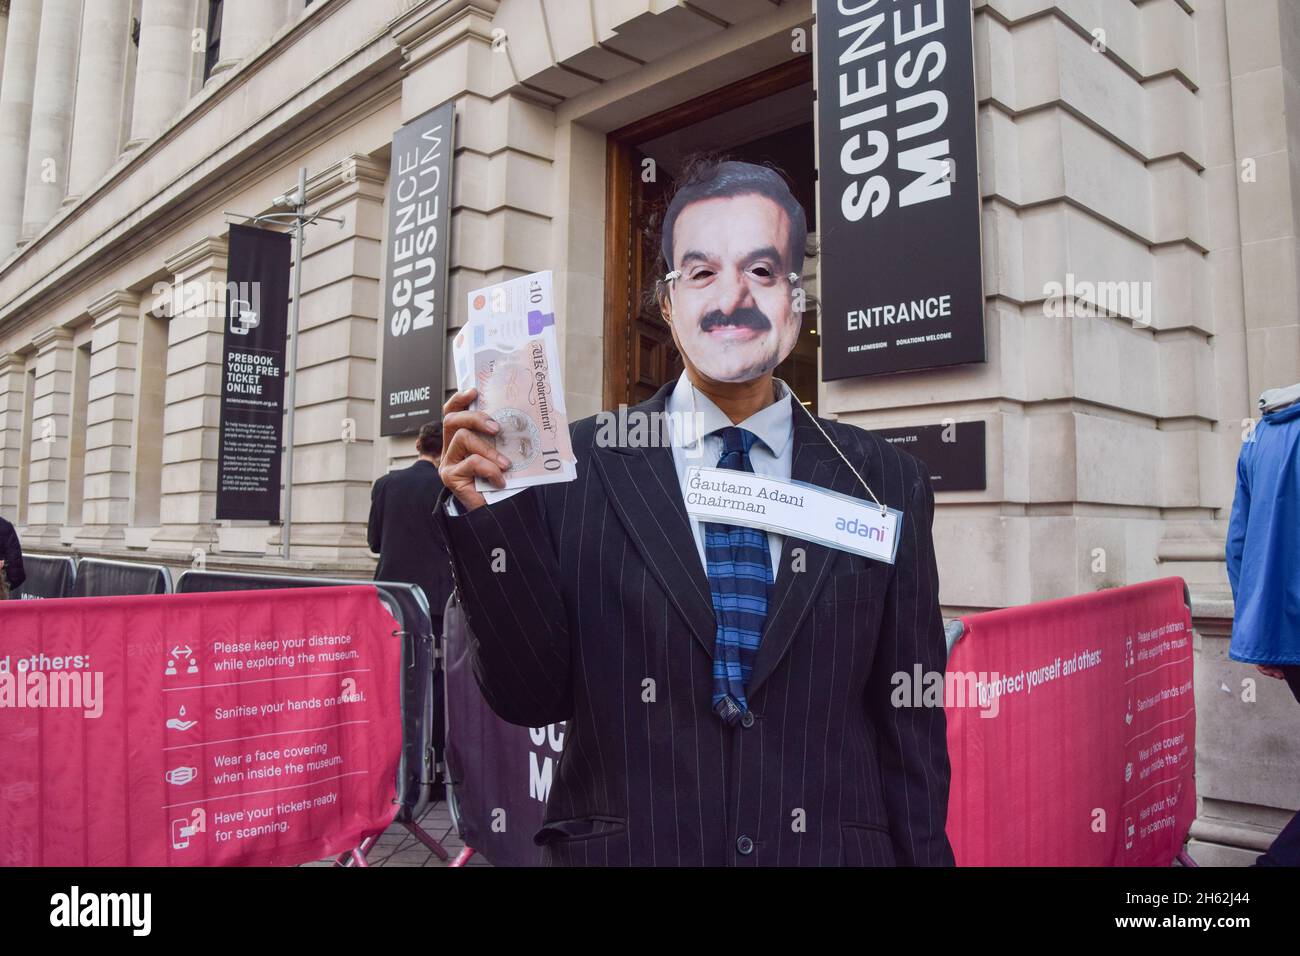 London, UK. 12th Nov, 2021. A protester dressed as Adani chairman Gautam Adani holds fake money during the demonstration.Extinction Rebellion demonstrators gathered outside the Science Museum in South Kensington, as part of their ongoing protests against sponsorship of the museum by fossil fuel companies Shell and Adani. (Photo by Vuk Valcic/SOPA Images/Sipa USA) Credit: Sipa USA/Alamy Live News Stock Photo